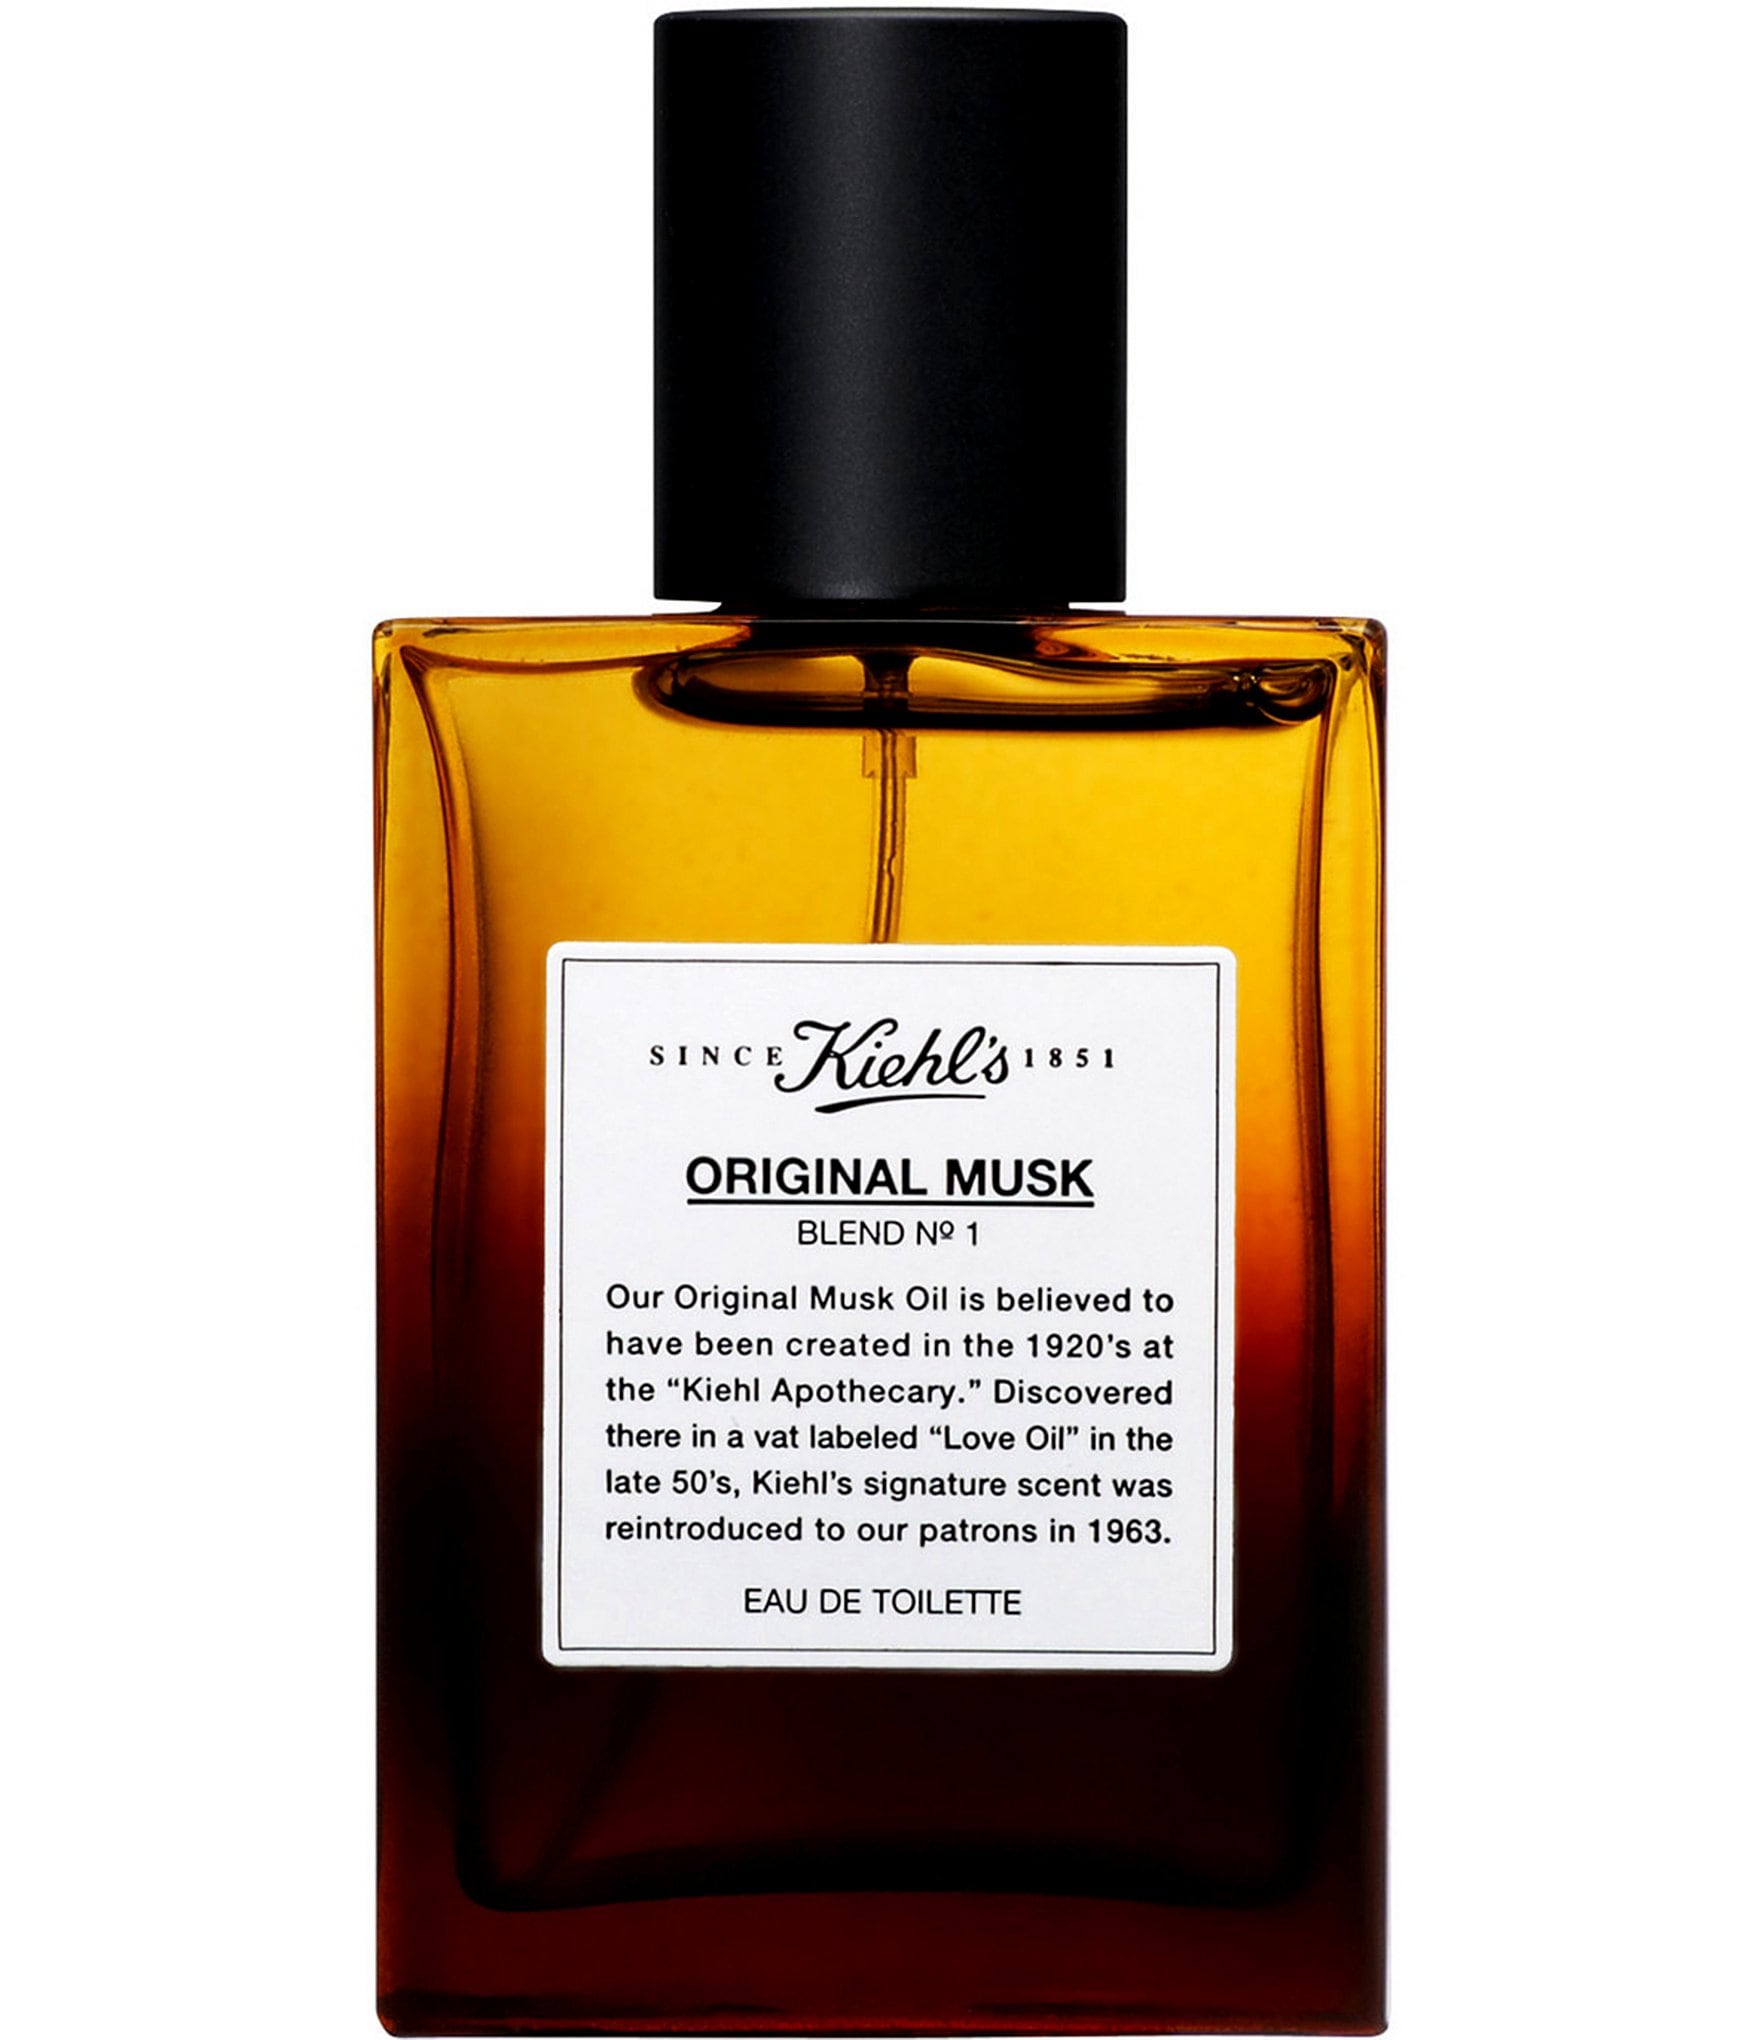 Original Musk Oil / Musk 1921 by Kiehl's » Reviews & Perfume Facts